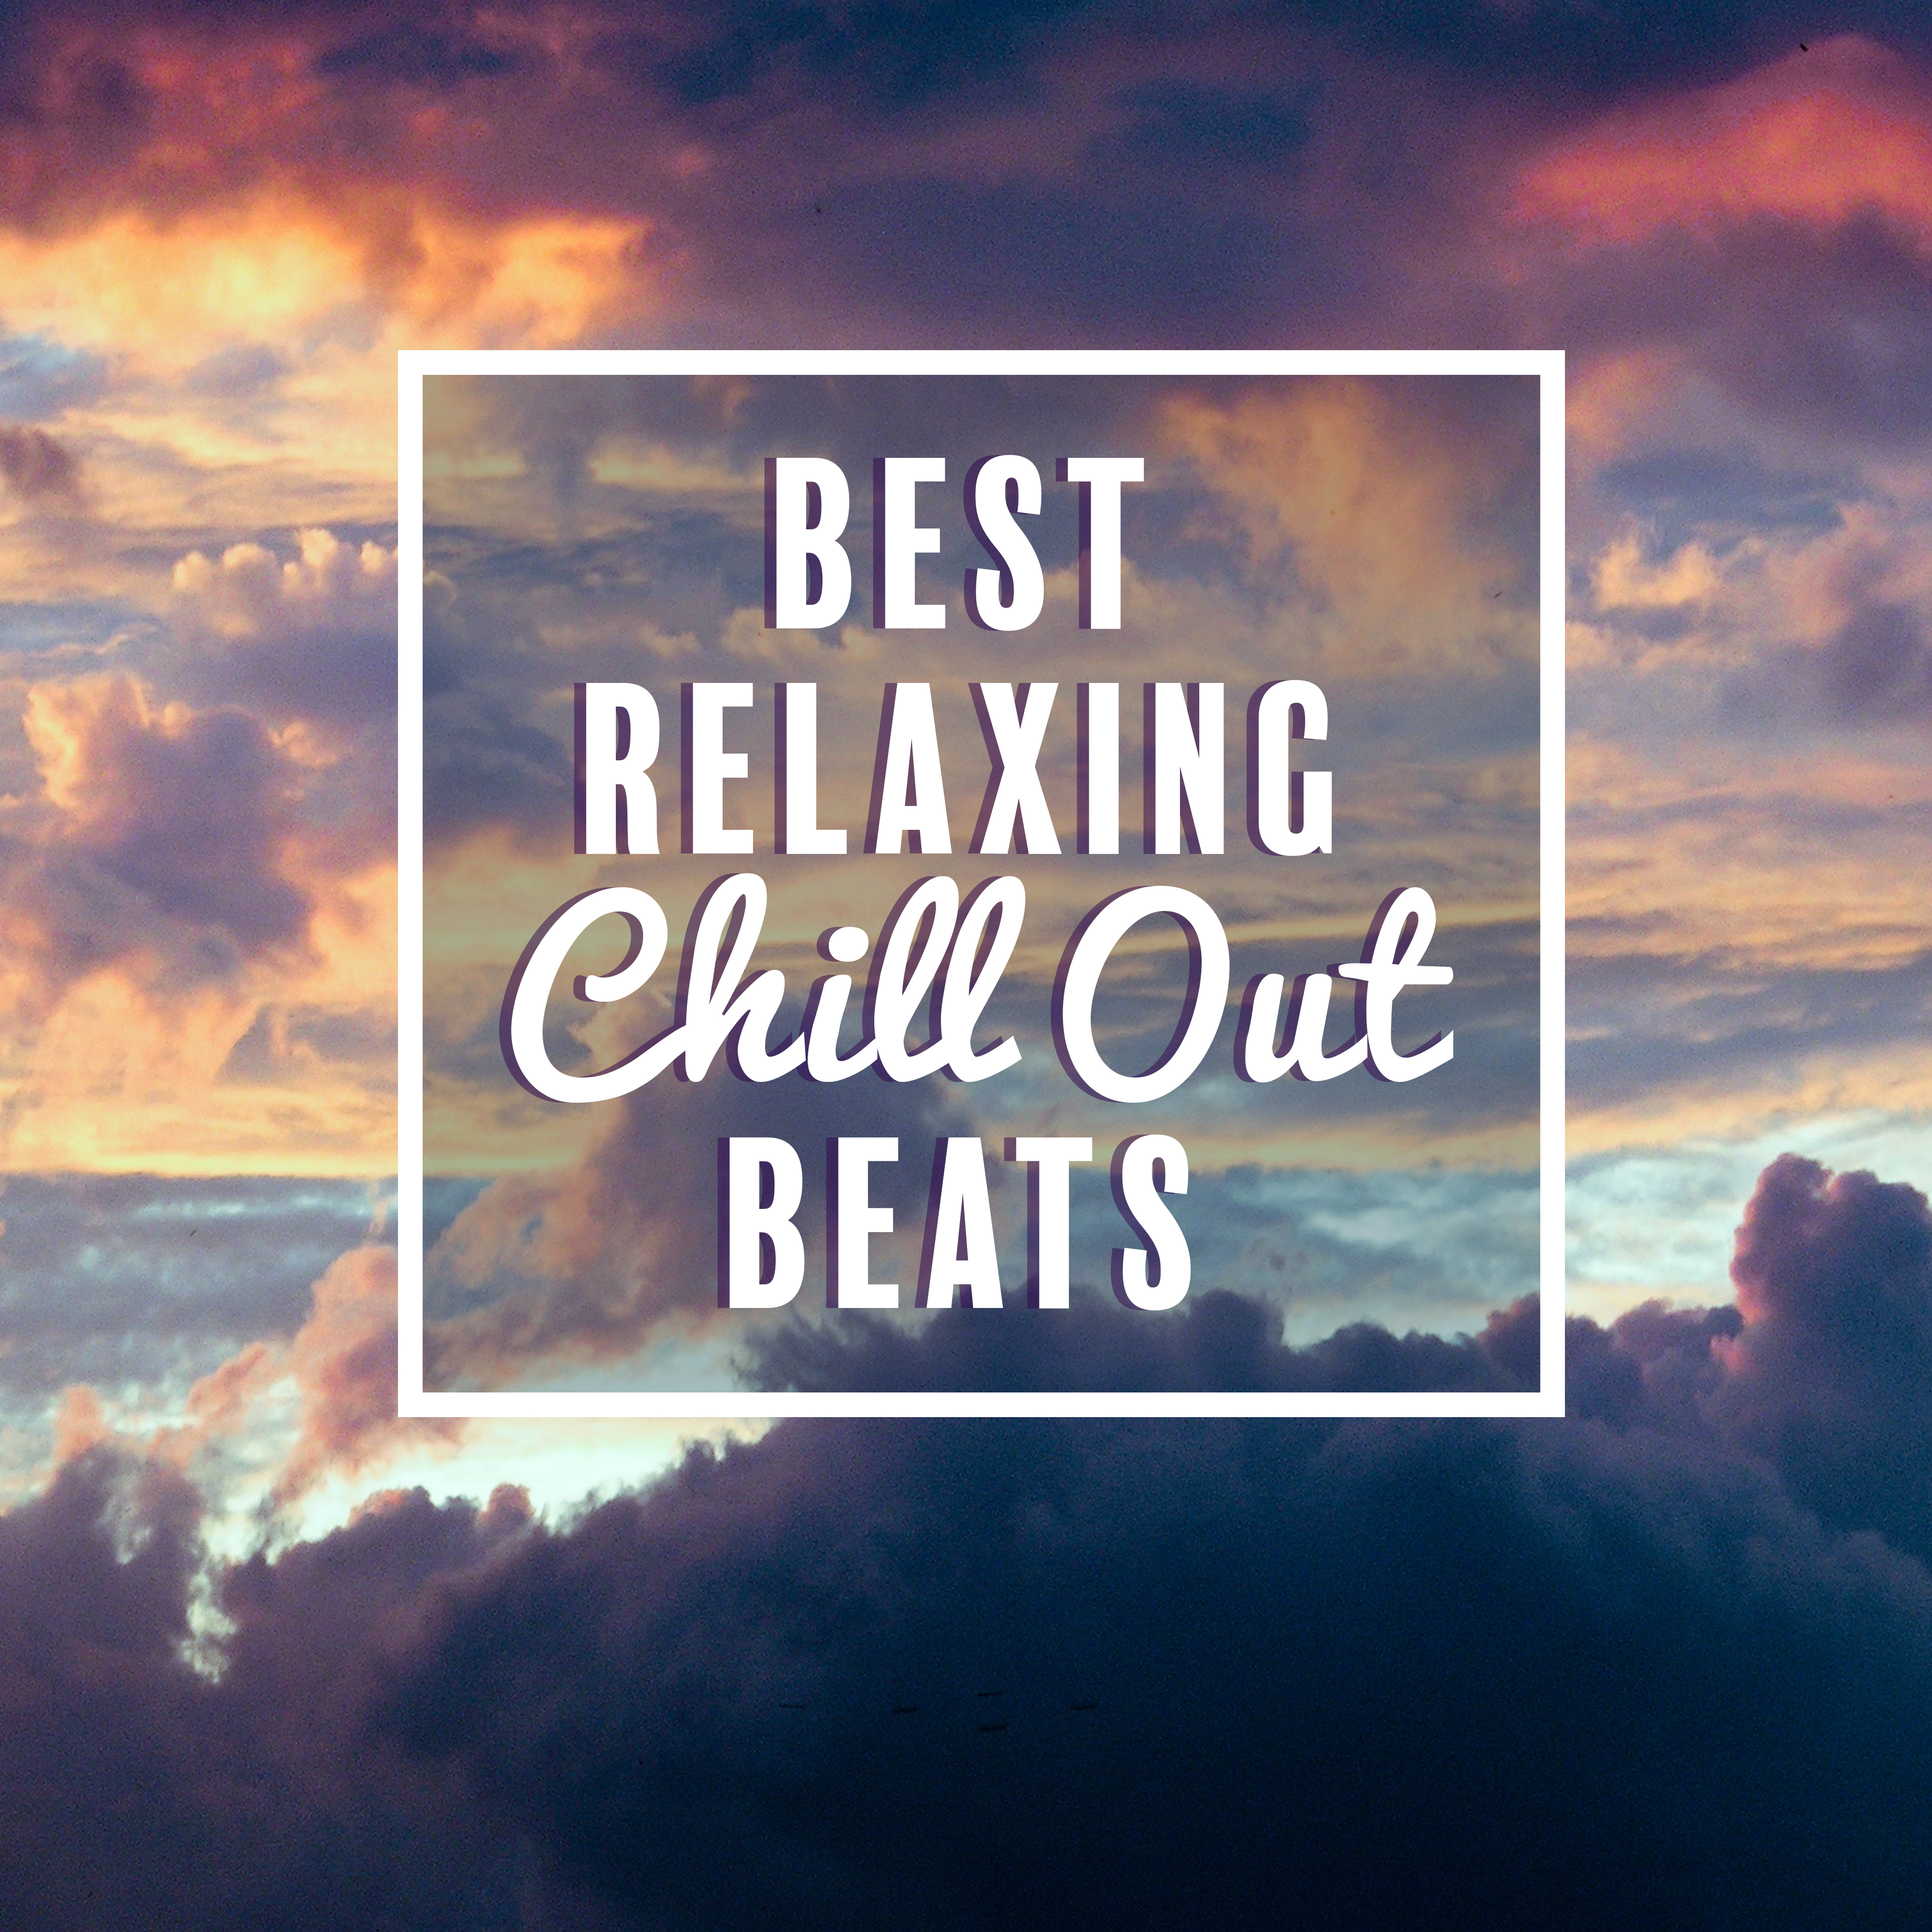 Best Relaxing Chill Out Beats